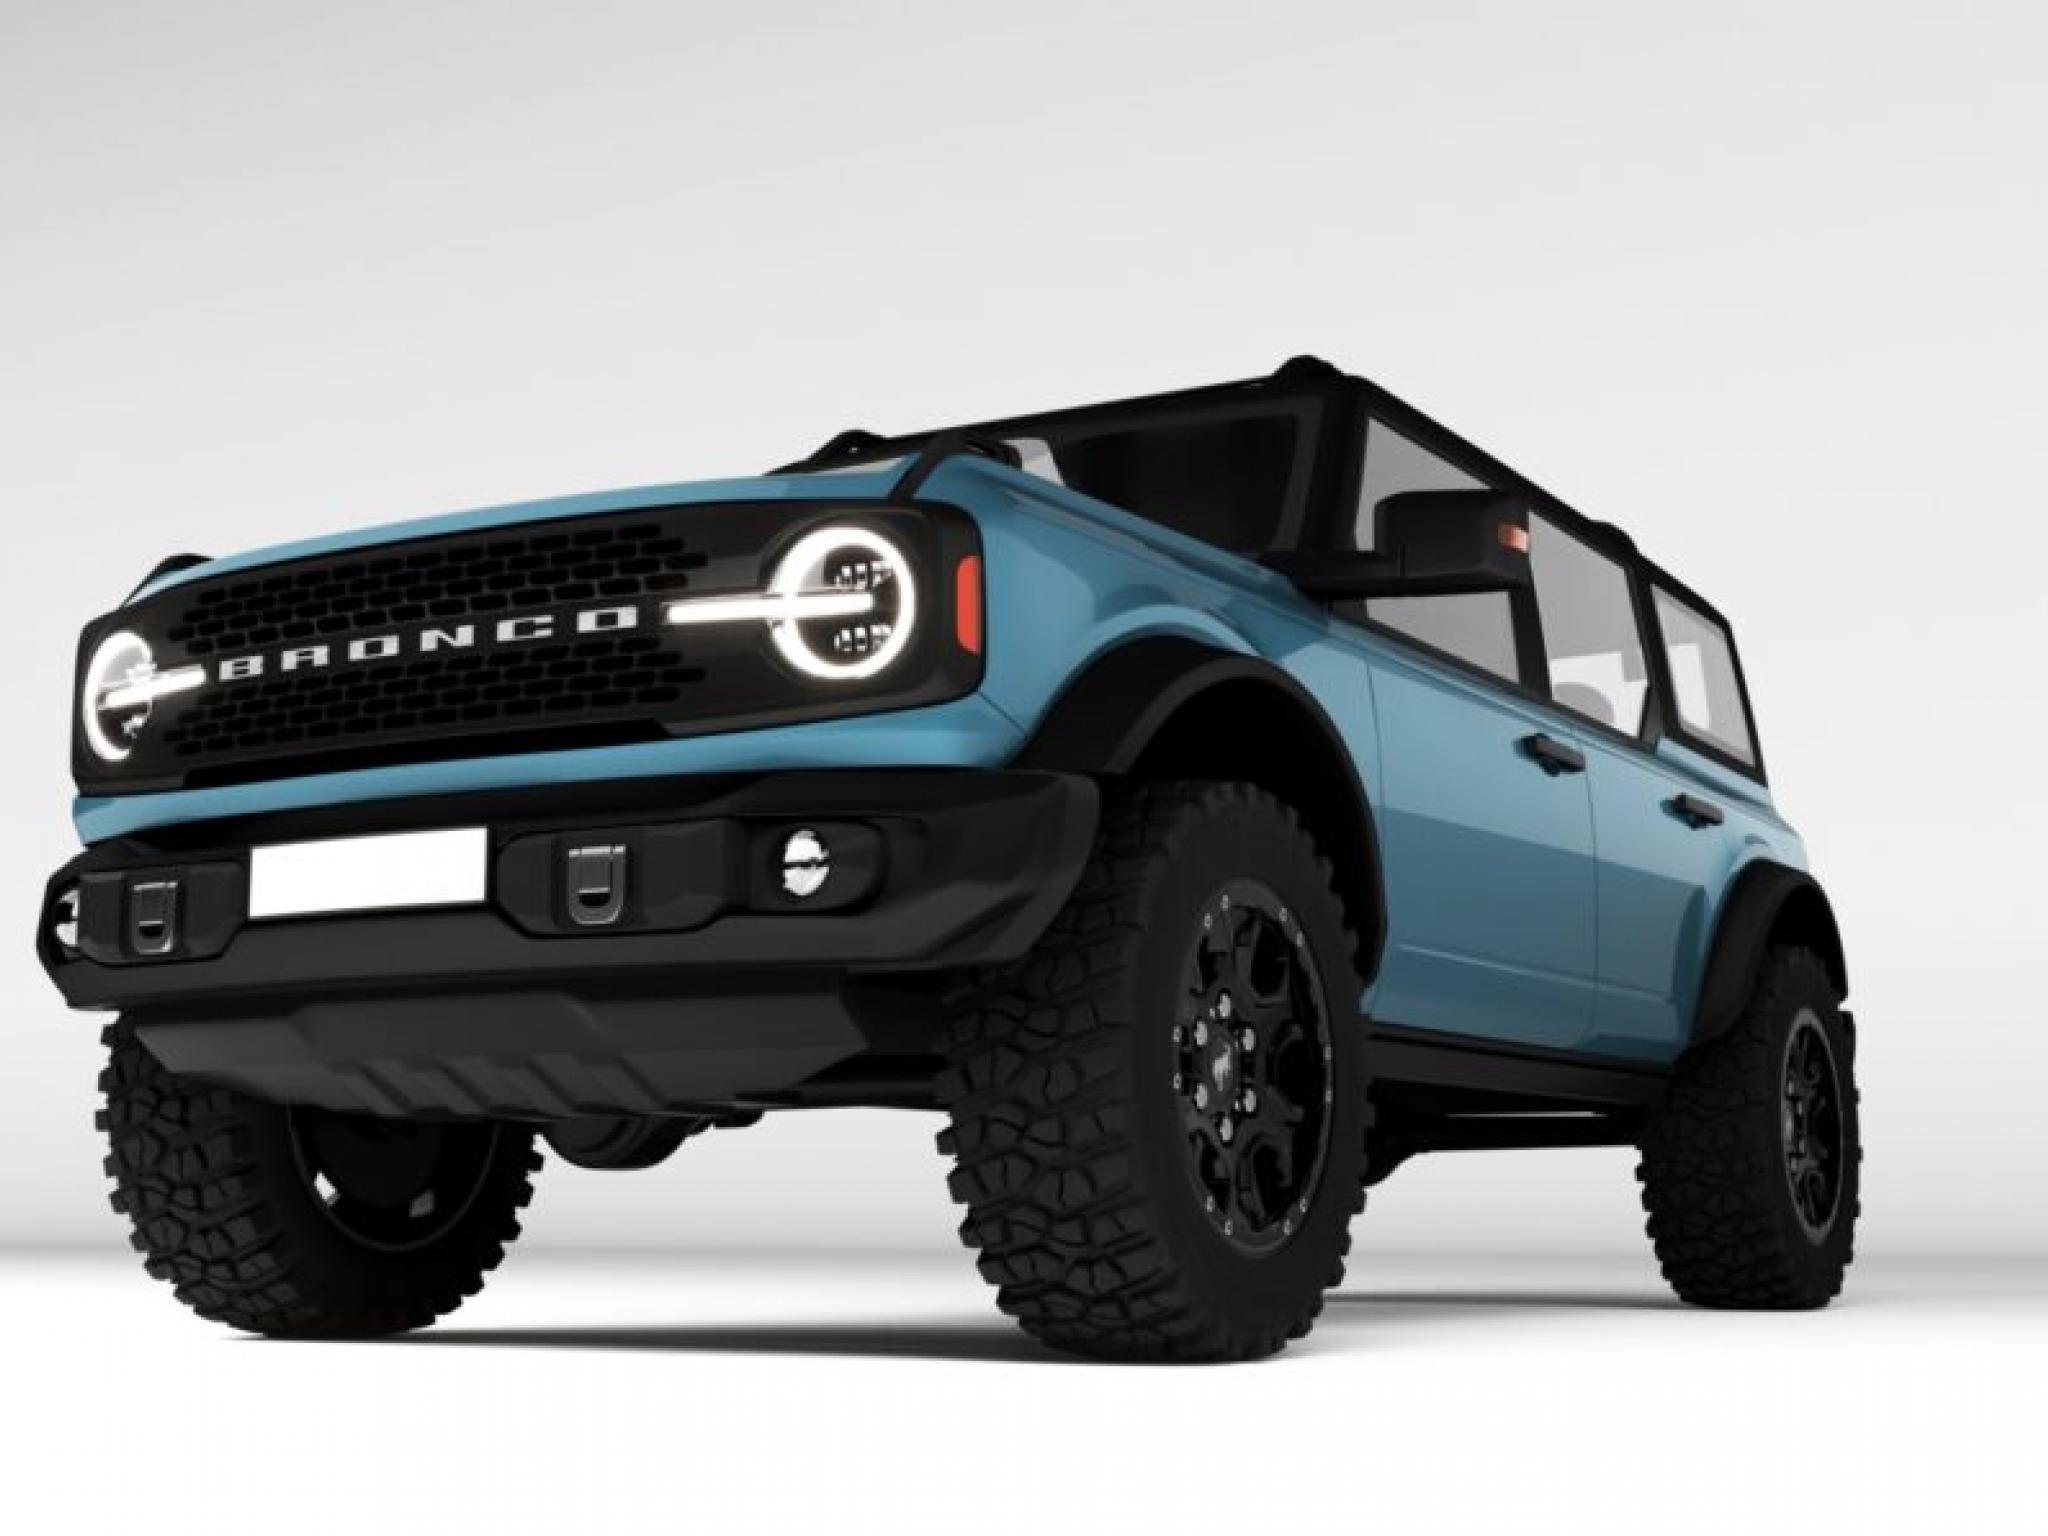  ford-bets-on-china-with-bronco-launch-after-sales-dip-in-america 